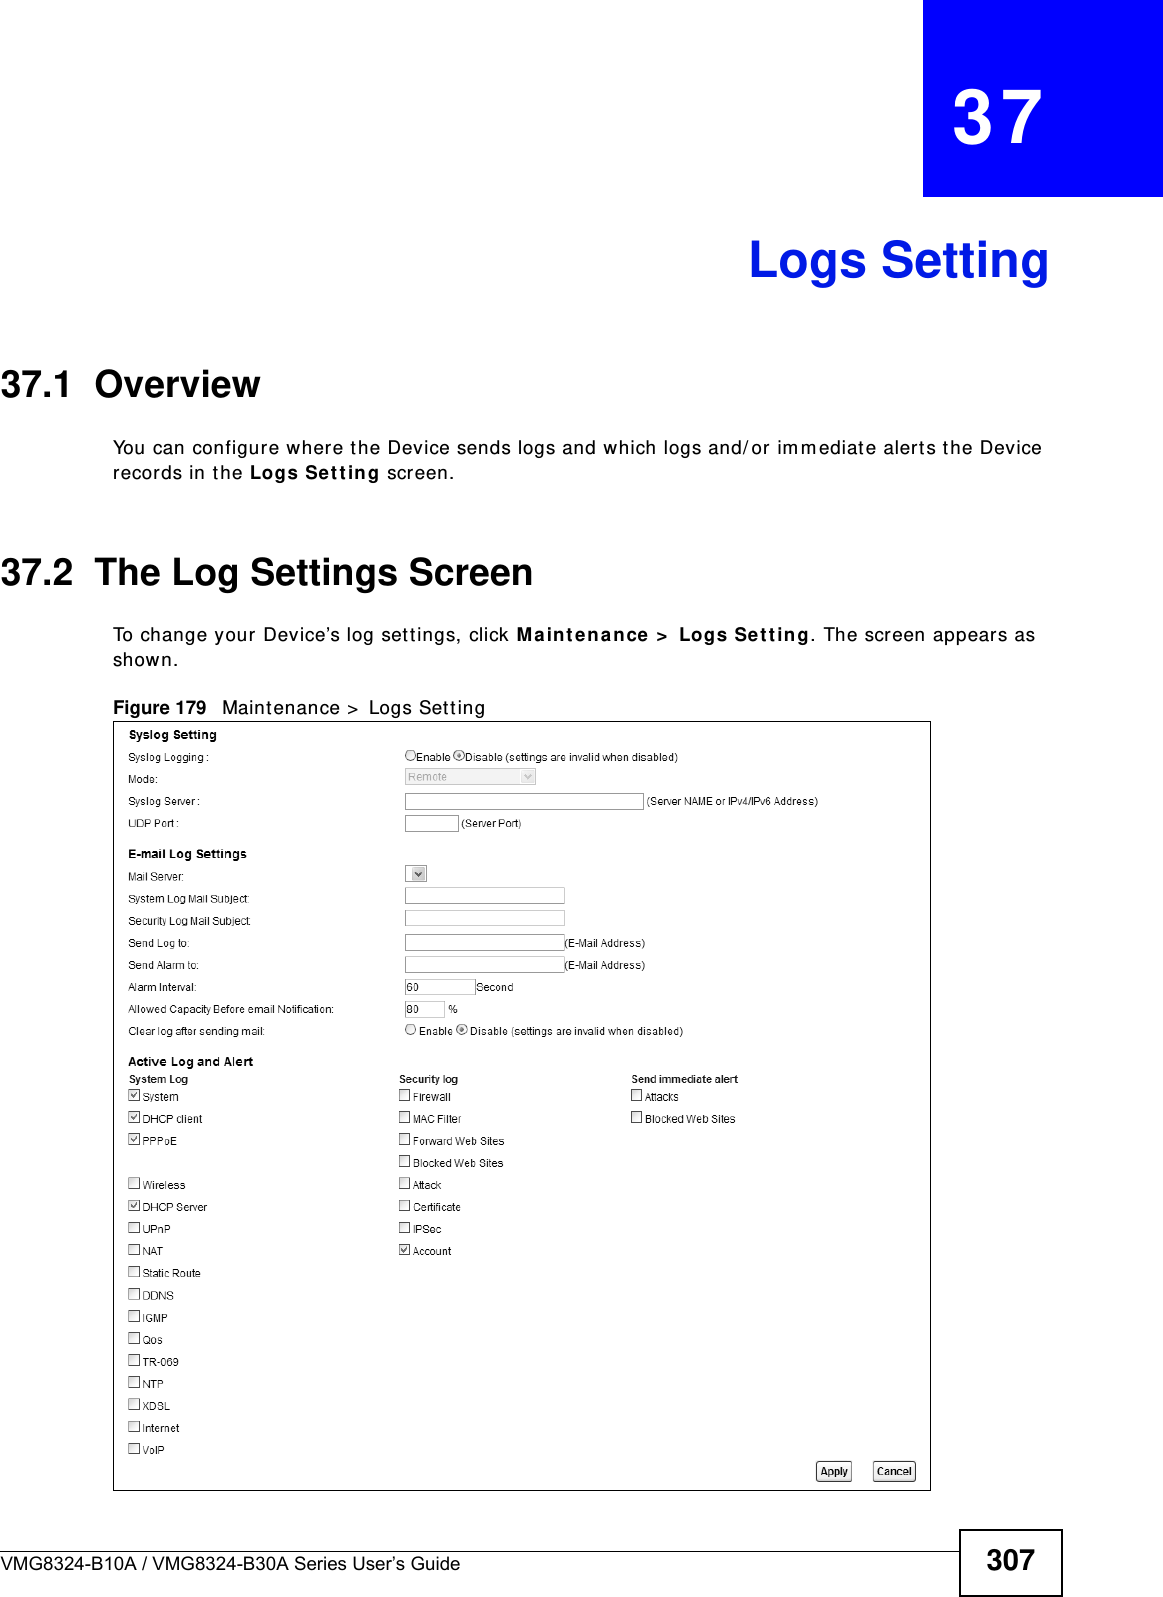 VMG8324-B10A / VMG8324-B30A Series User’s Guide 307CHAPTER   37Logs Setting37.1  Overview You can configure w here the Device sends logs and which logs and/ or im m ediate alerts t he Device records in t he Logs Set t ing screen.37.2  The Log Settings ScreenTo change your Device’s log sett ings, click M ain ten ance &gt;  Logs Set t in g. The screen appears as shown.Figure 179   Maintenance &gt;  Logs Set ting